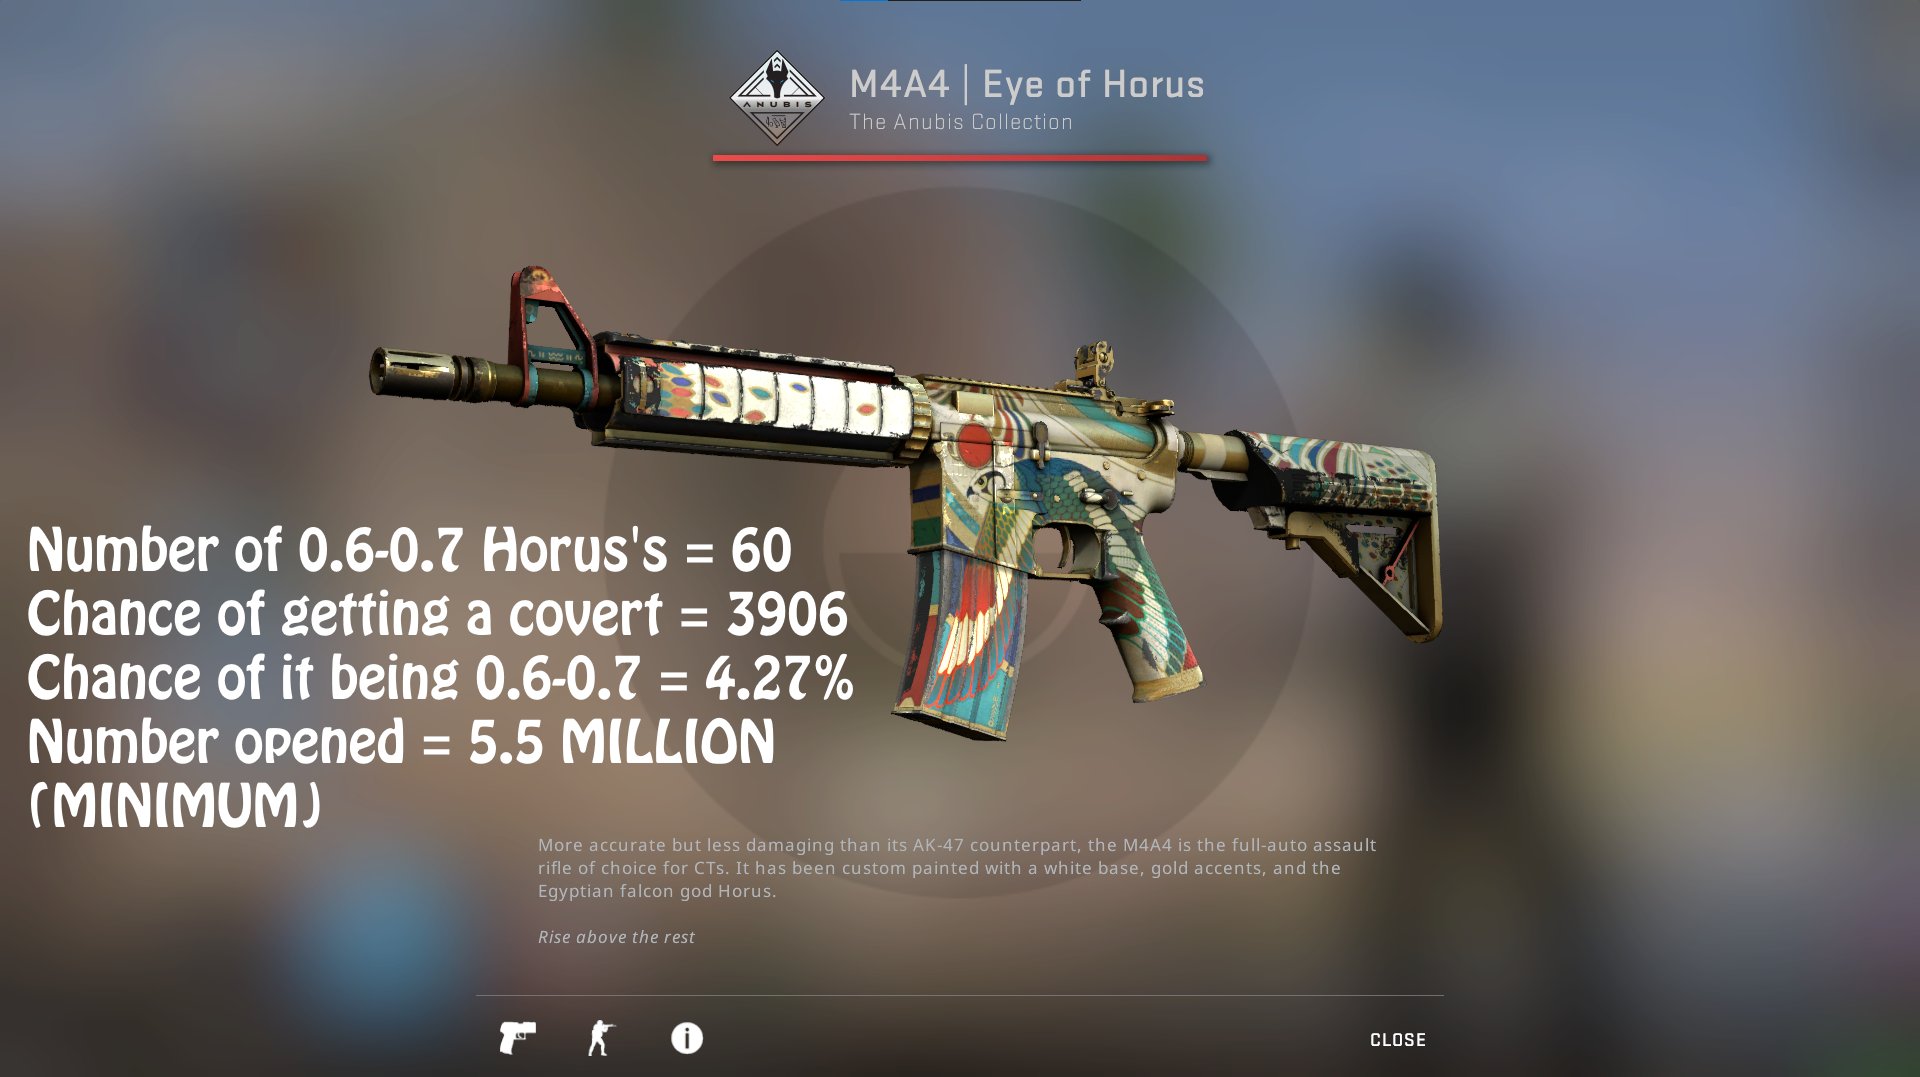 New CSGO skins from Valve have likely made $11 million in one day: An image calculating the spread of CSGO skins based on Valve's Anubis design